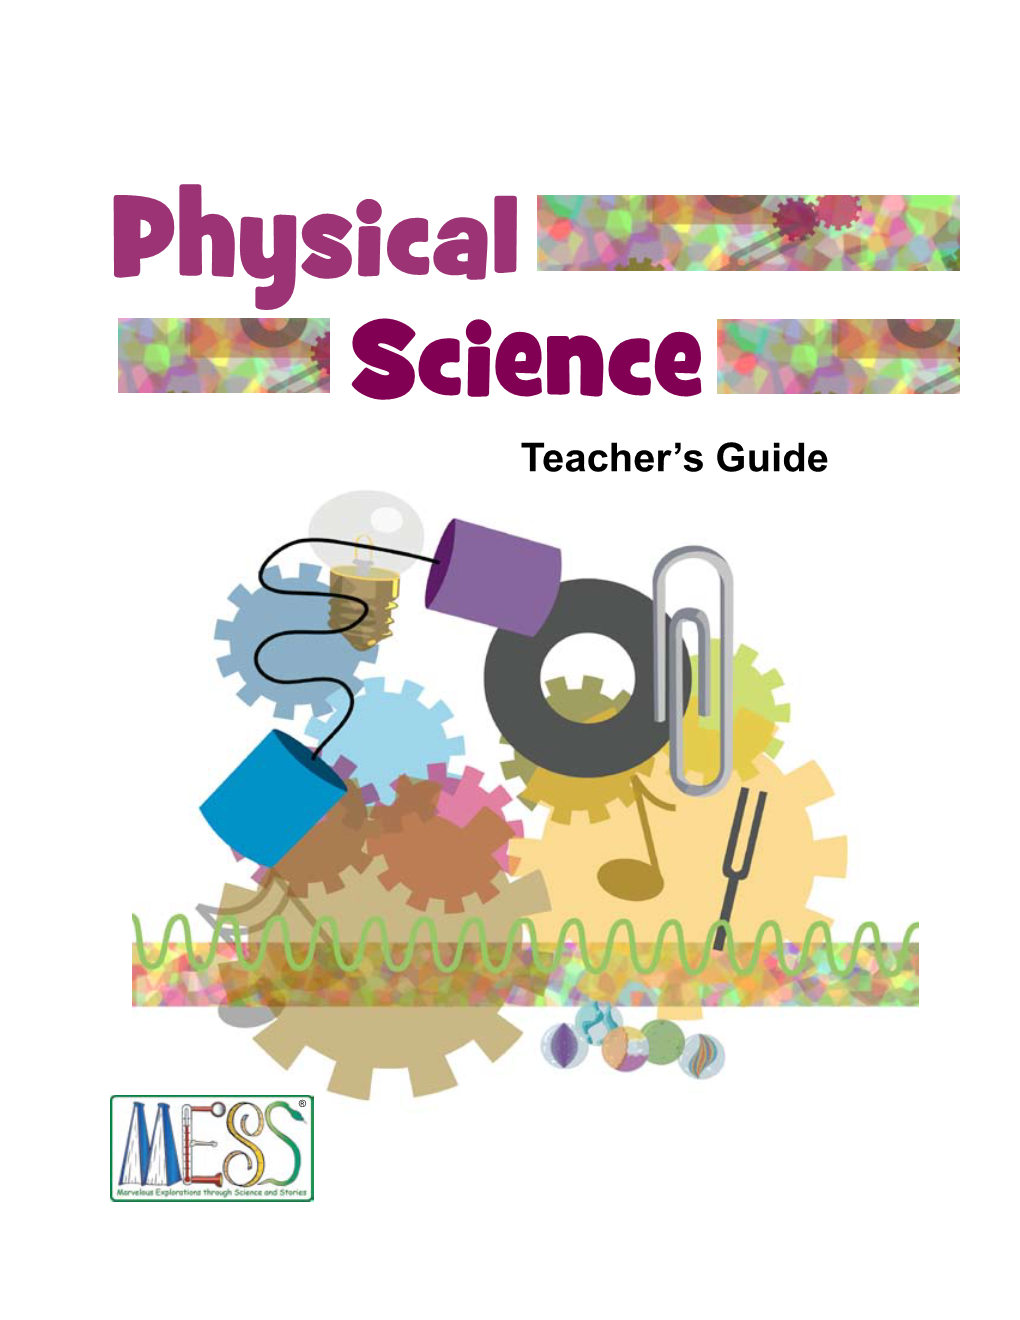 Physical Science Teacher's Guide